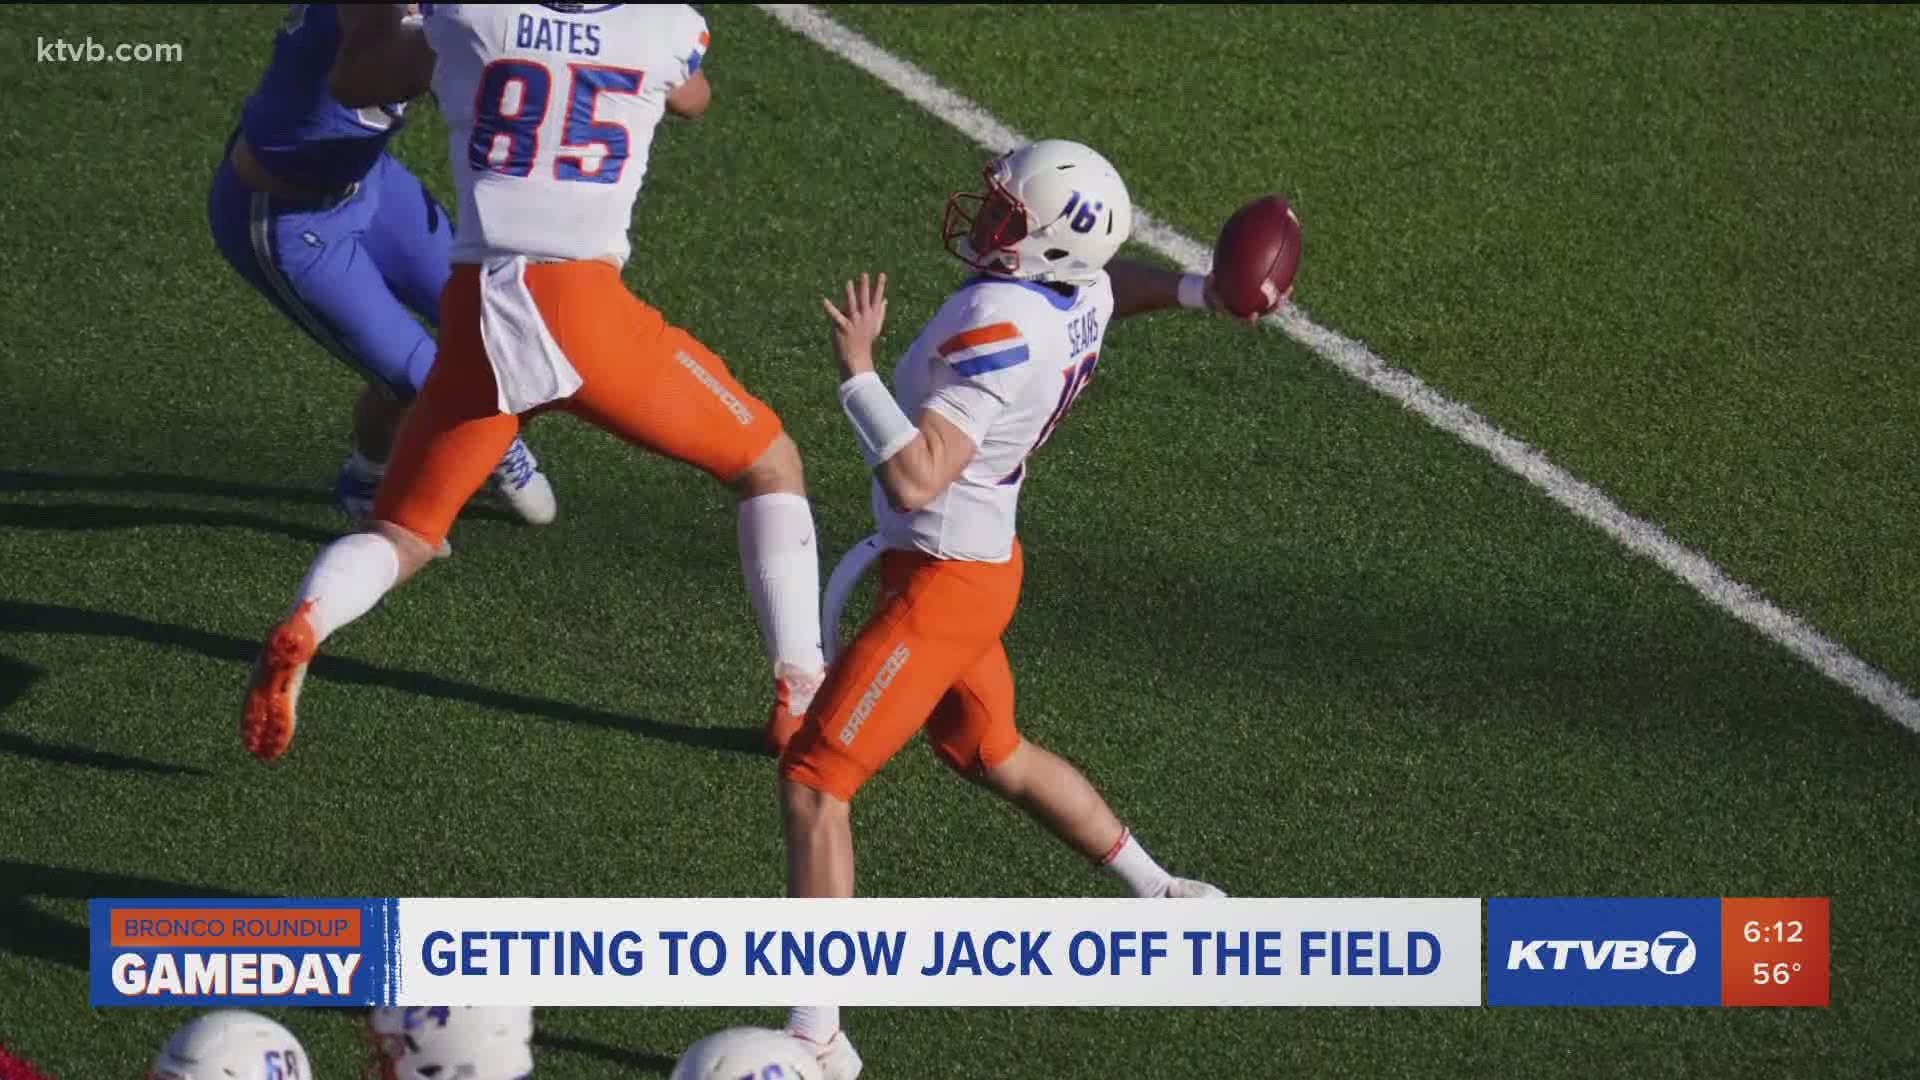 Hear from wide receivers Khalil Shakir and CT Thomas about the Broncos' second-string quarterback who played well when Hank Bachmeier did not travel against AFA.